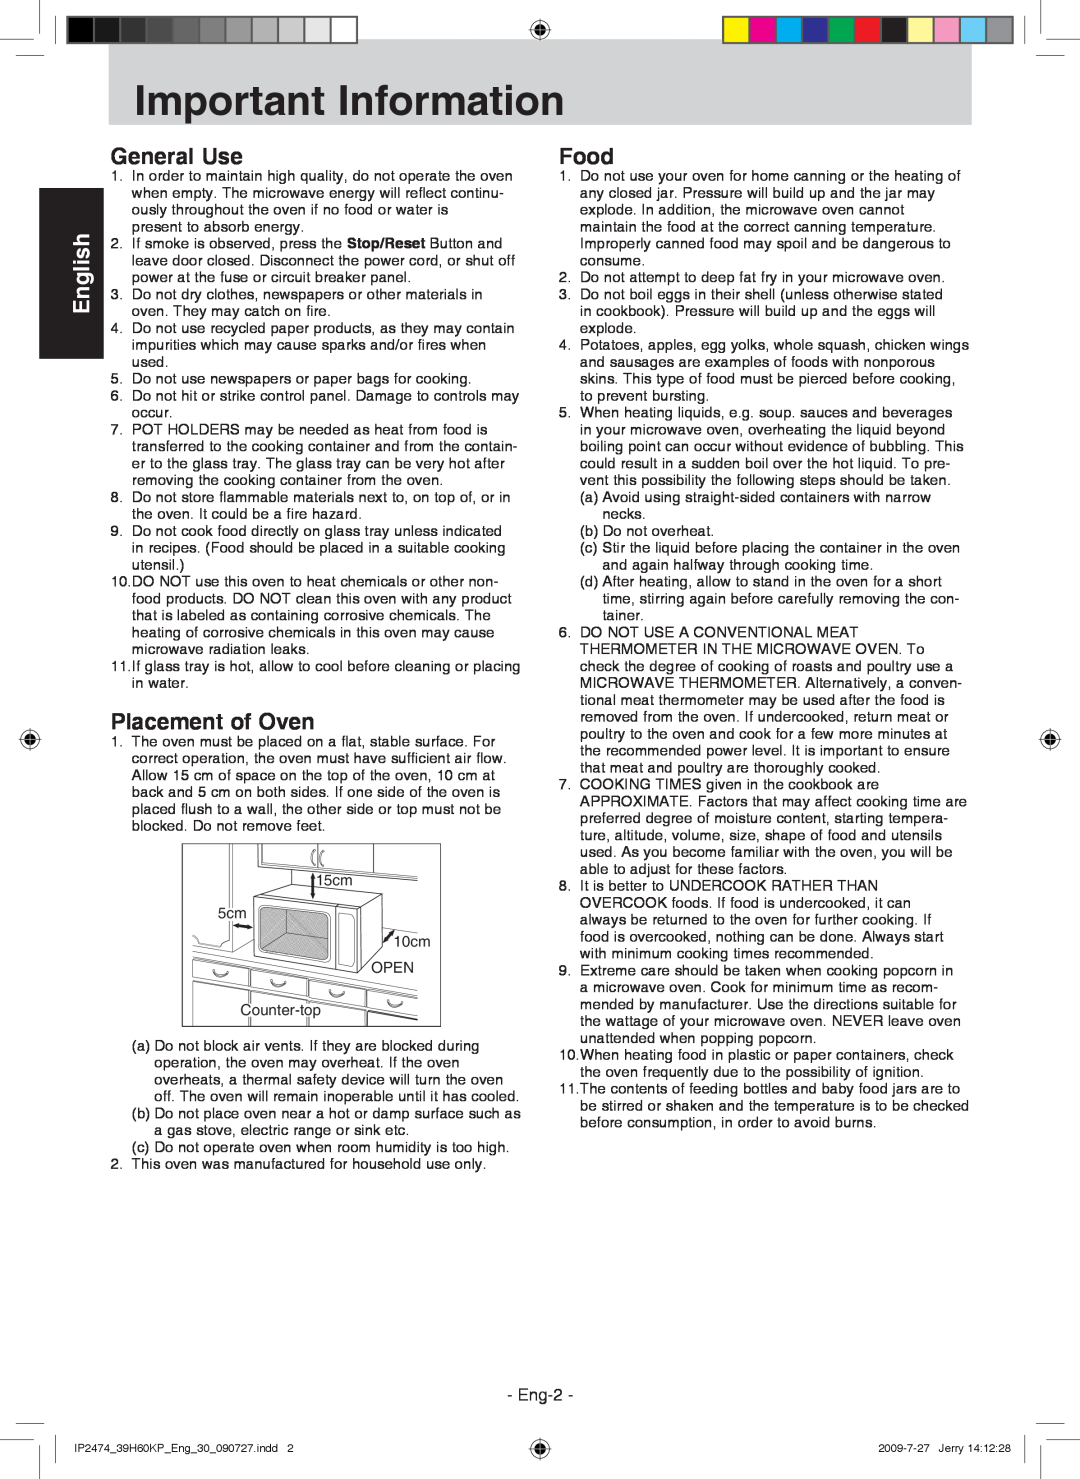 Panasonic NN-GD579S manual Important Information, General Use, Placement of Oven, Food, English, Eng-2 